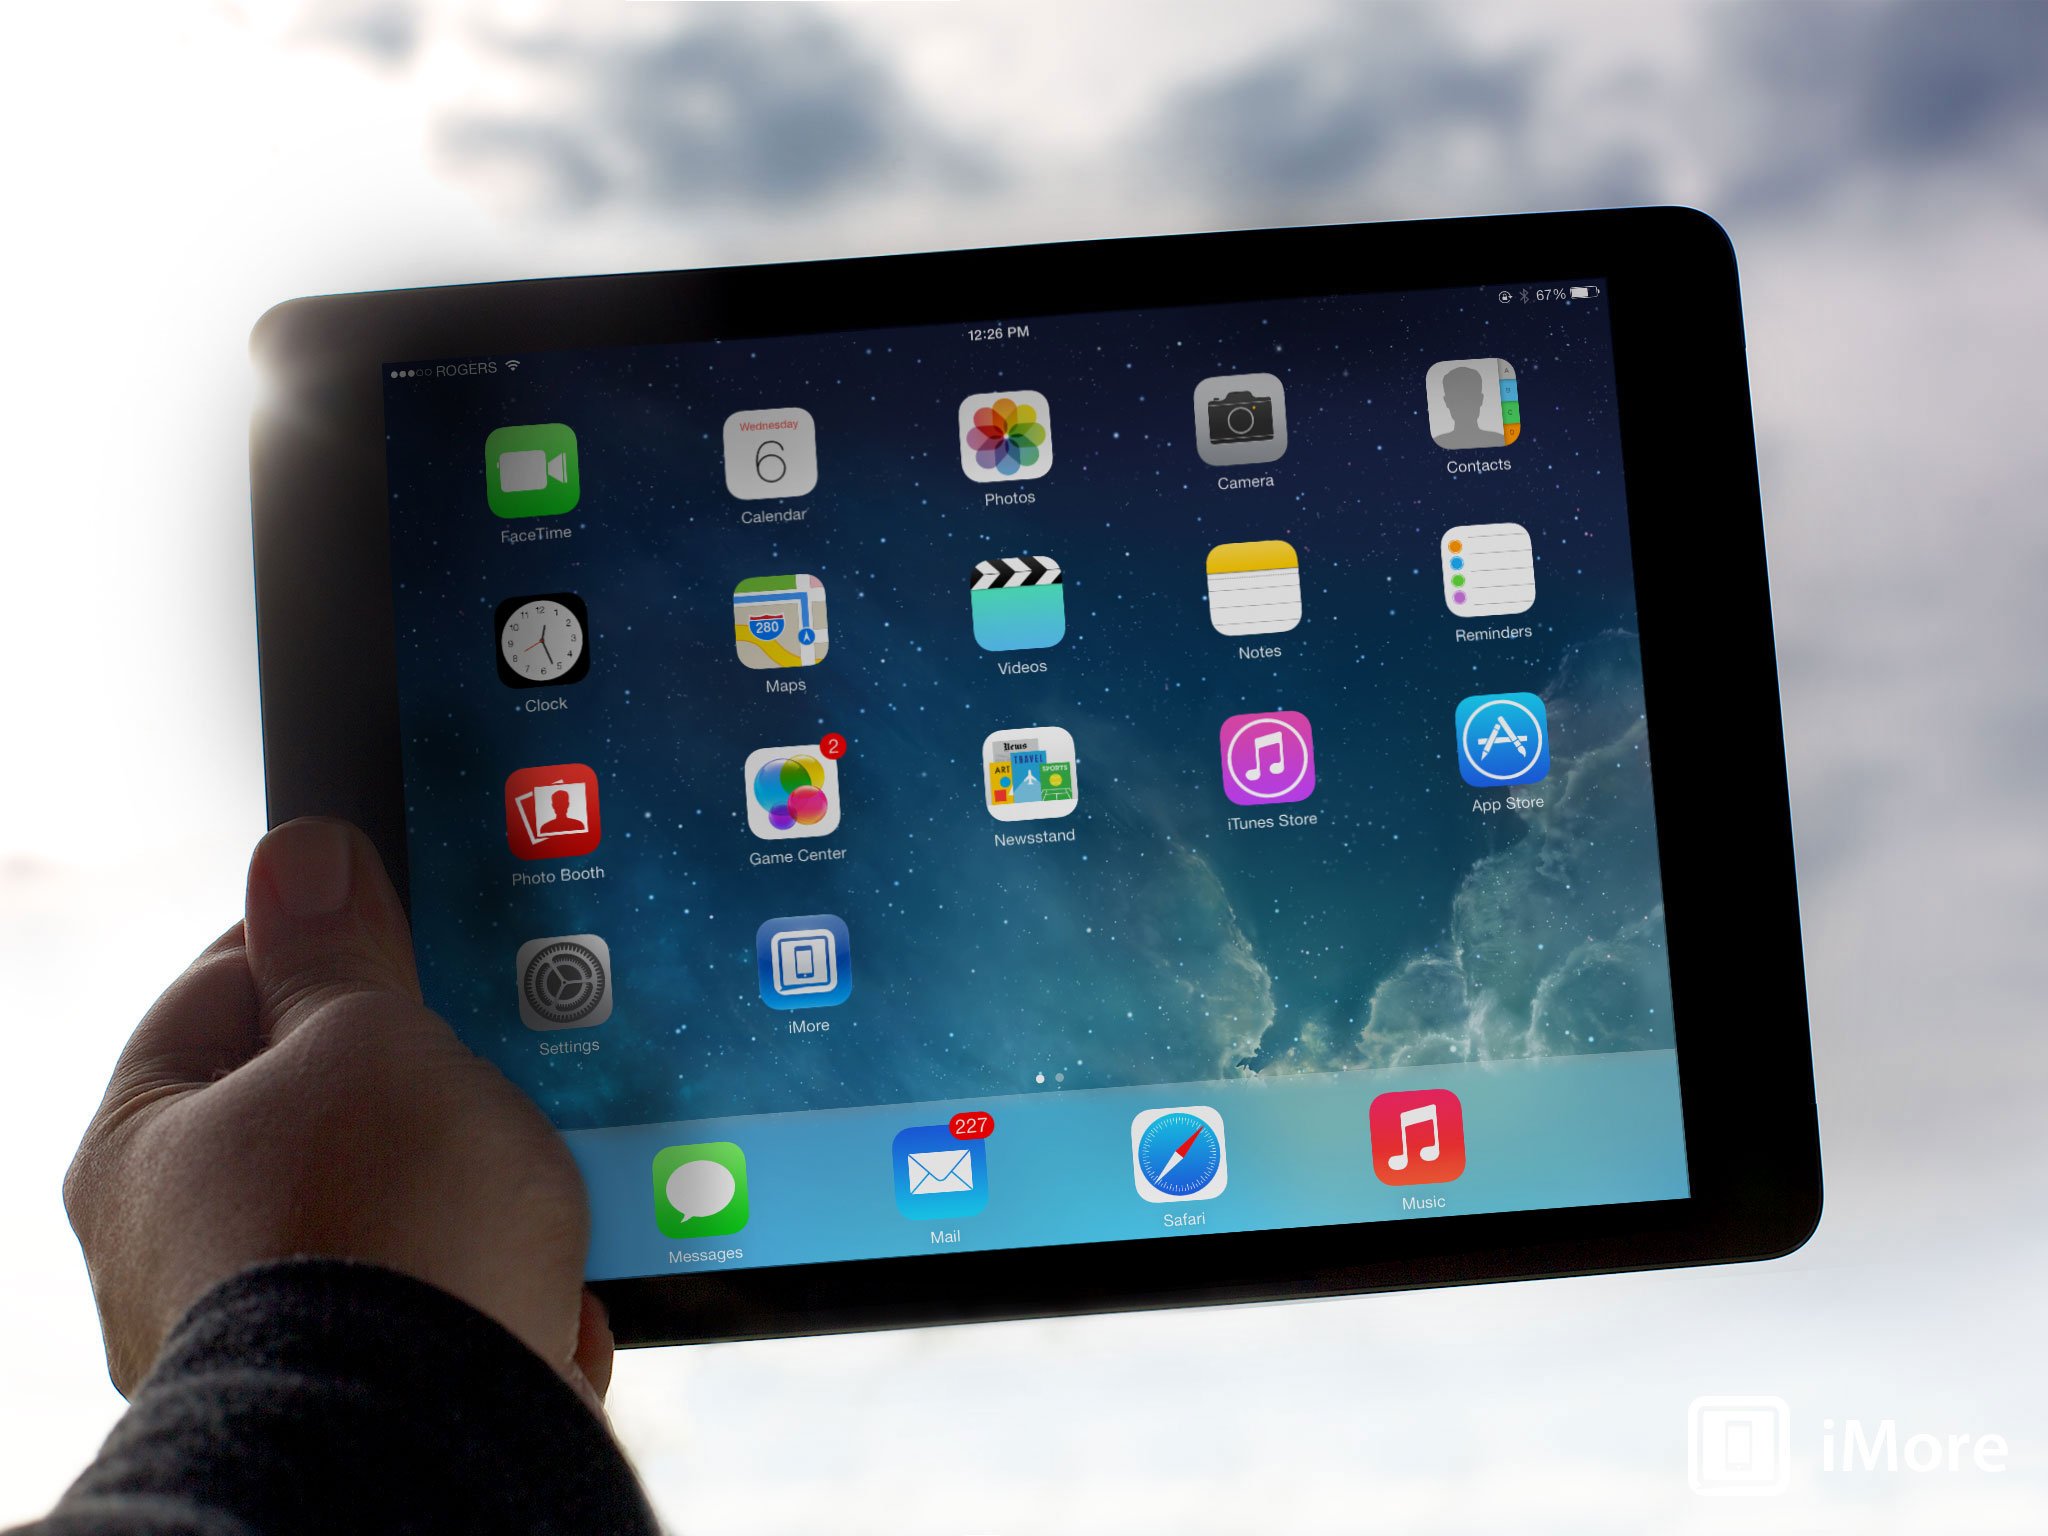 The definitive review of Apple's lighter, thinner, faster, 64-bit iPad Air